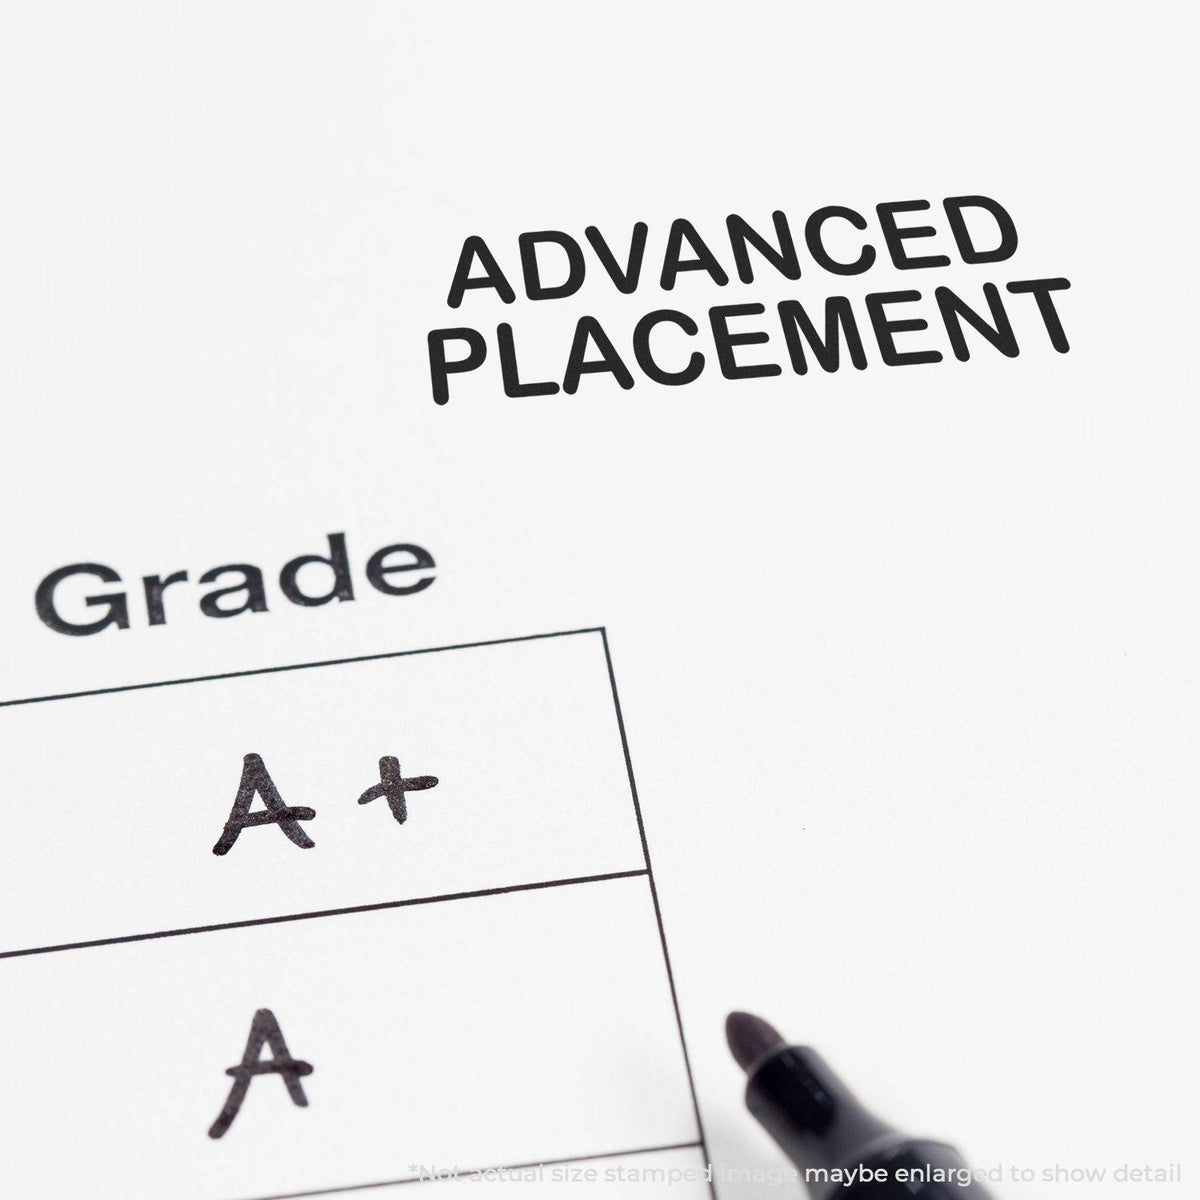 Advanced Placement Rubber Stamp In Use Photo